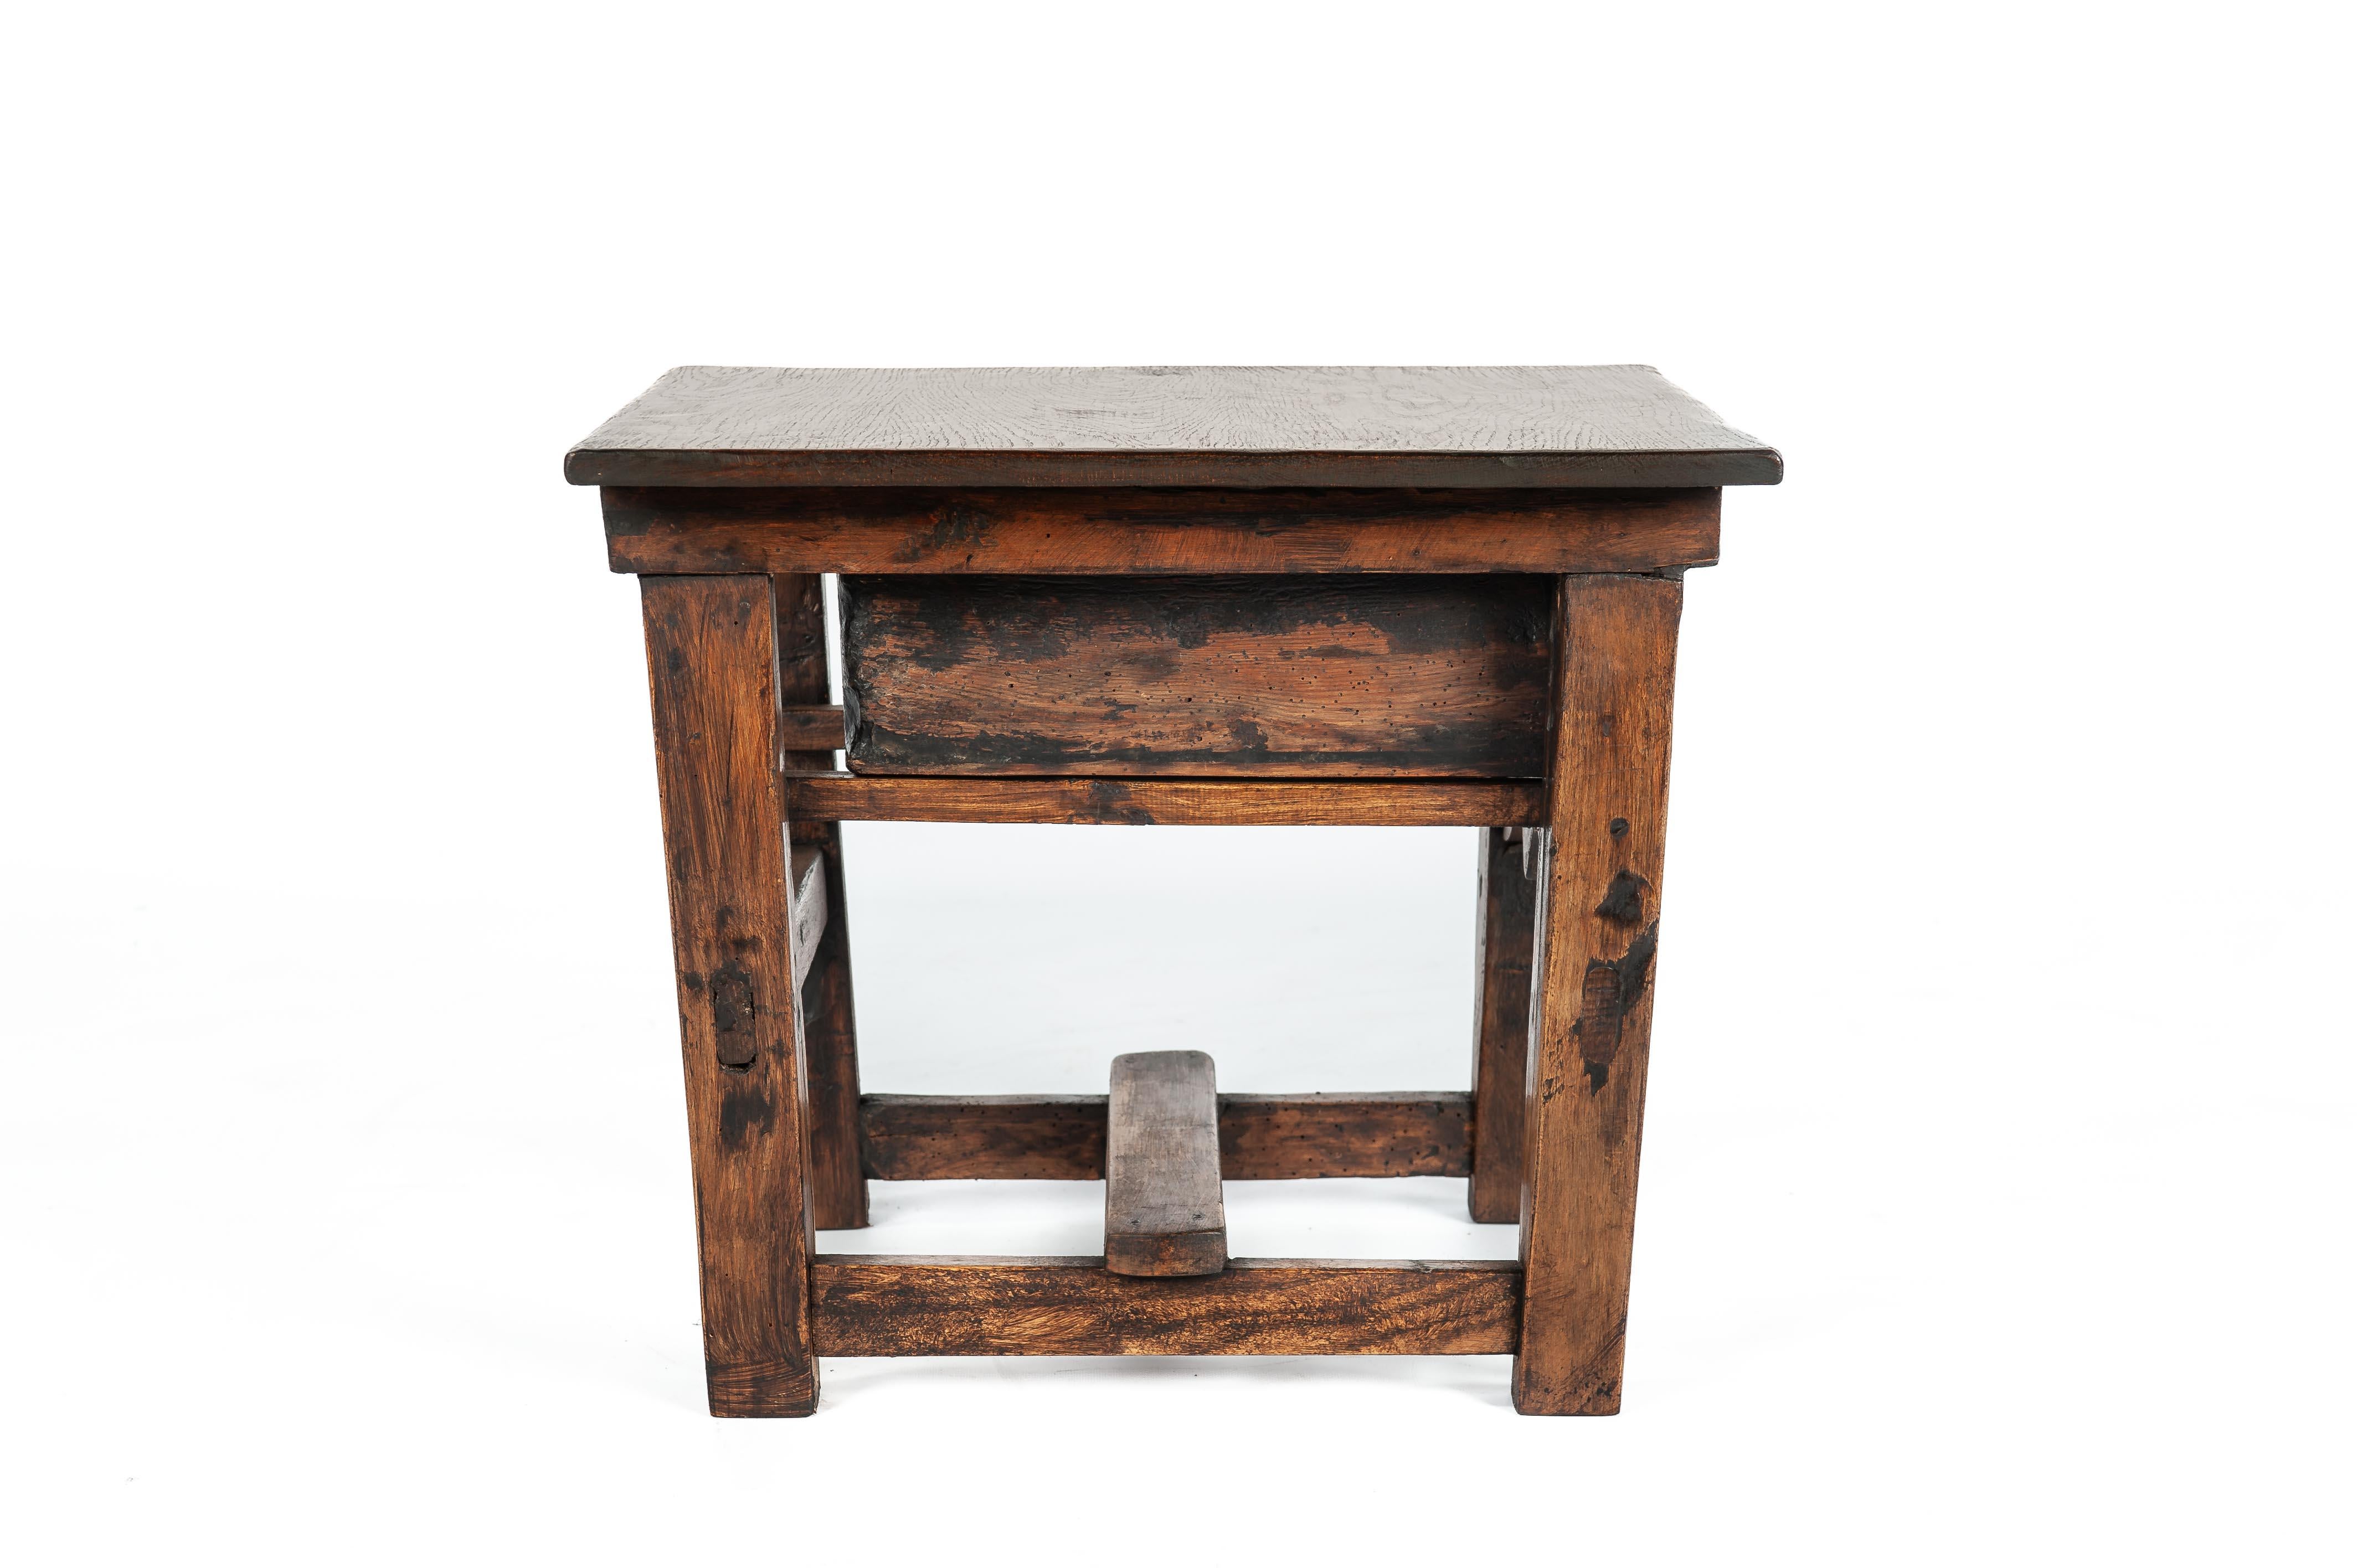 Forged Antique early 19th century Spanish Provincial Chestnut side table or tavern tabl For Sale